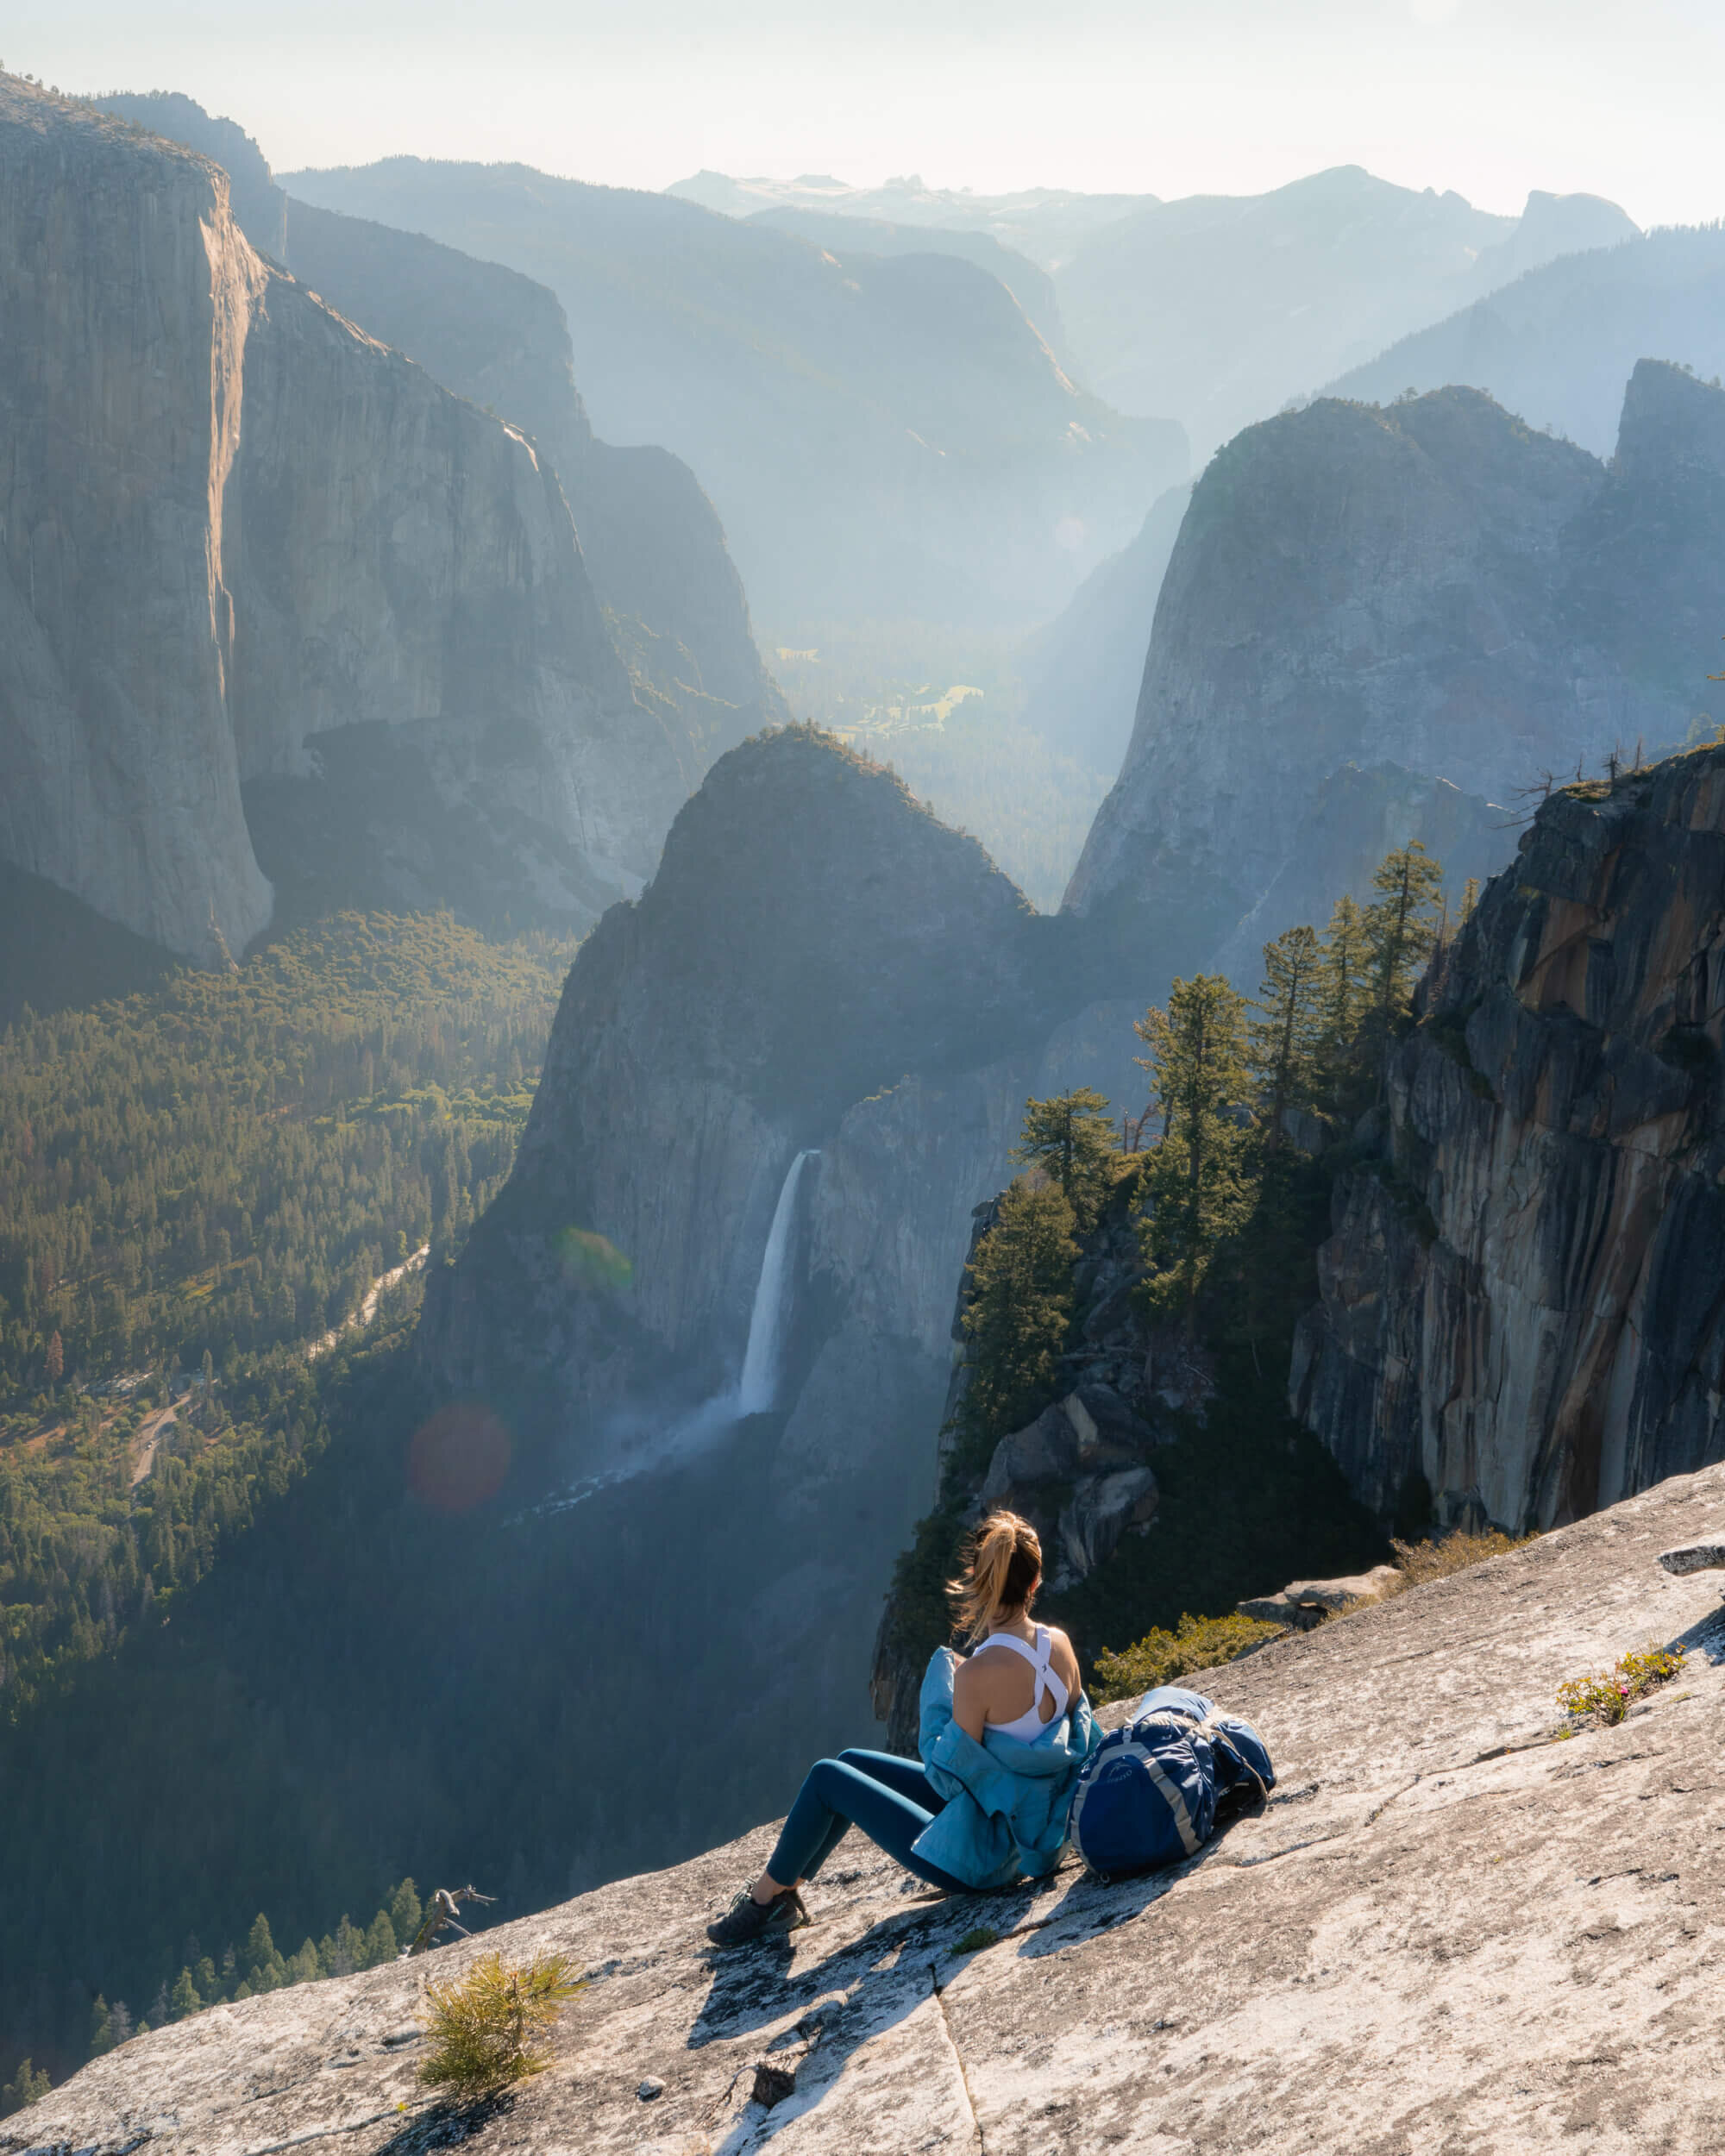 The Pohono Trail rewards hikers with stunning viewpoints of Yosemite Valley from the south rim.